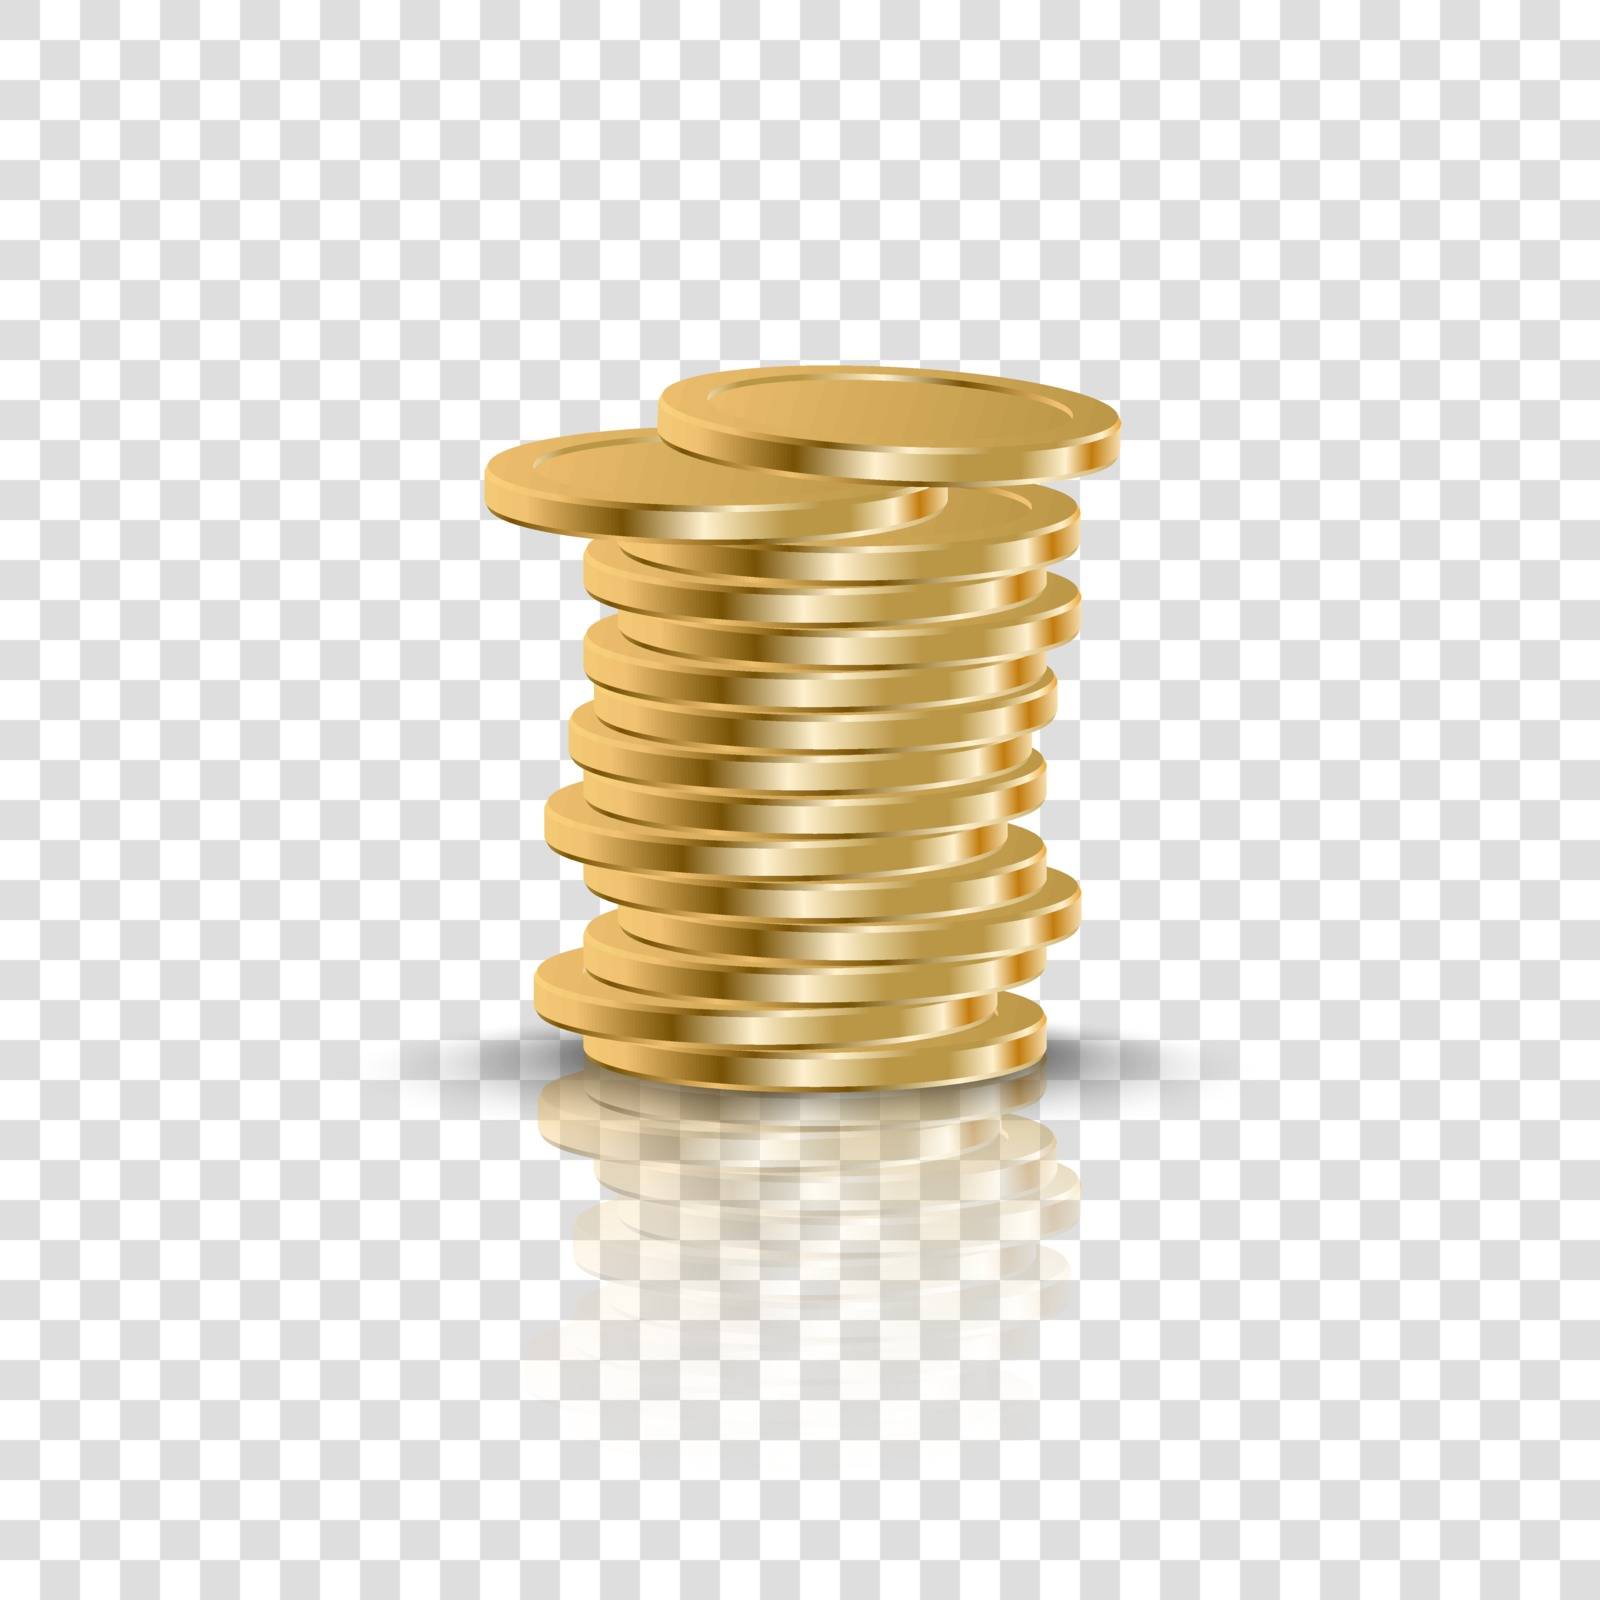 Realistic gold coins stack on transparent backdrop by Elena_Garder